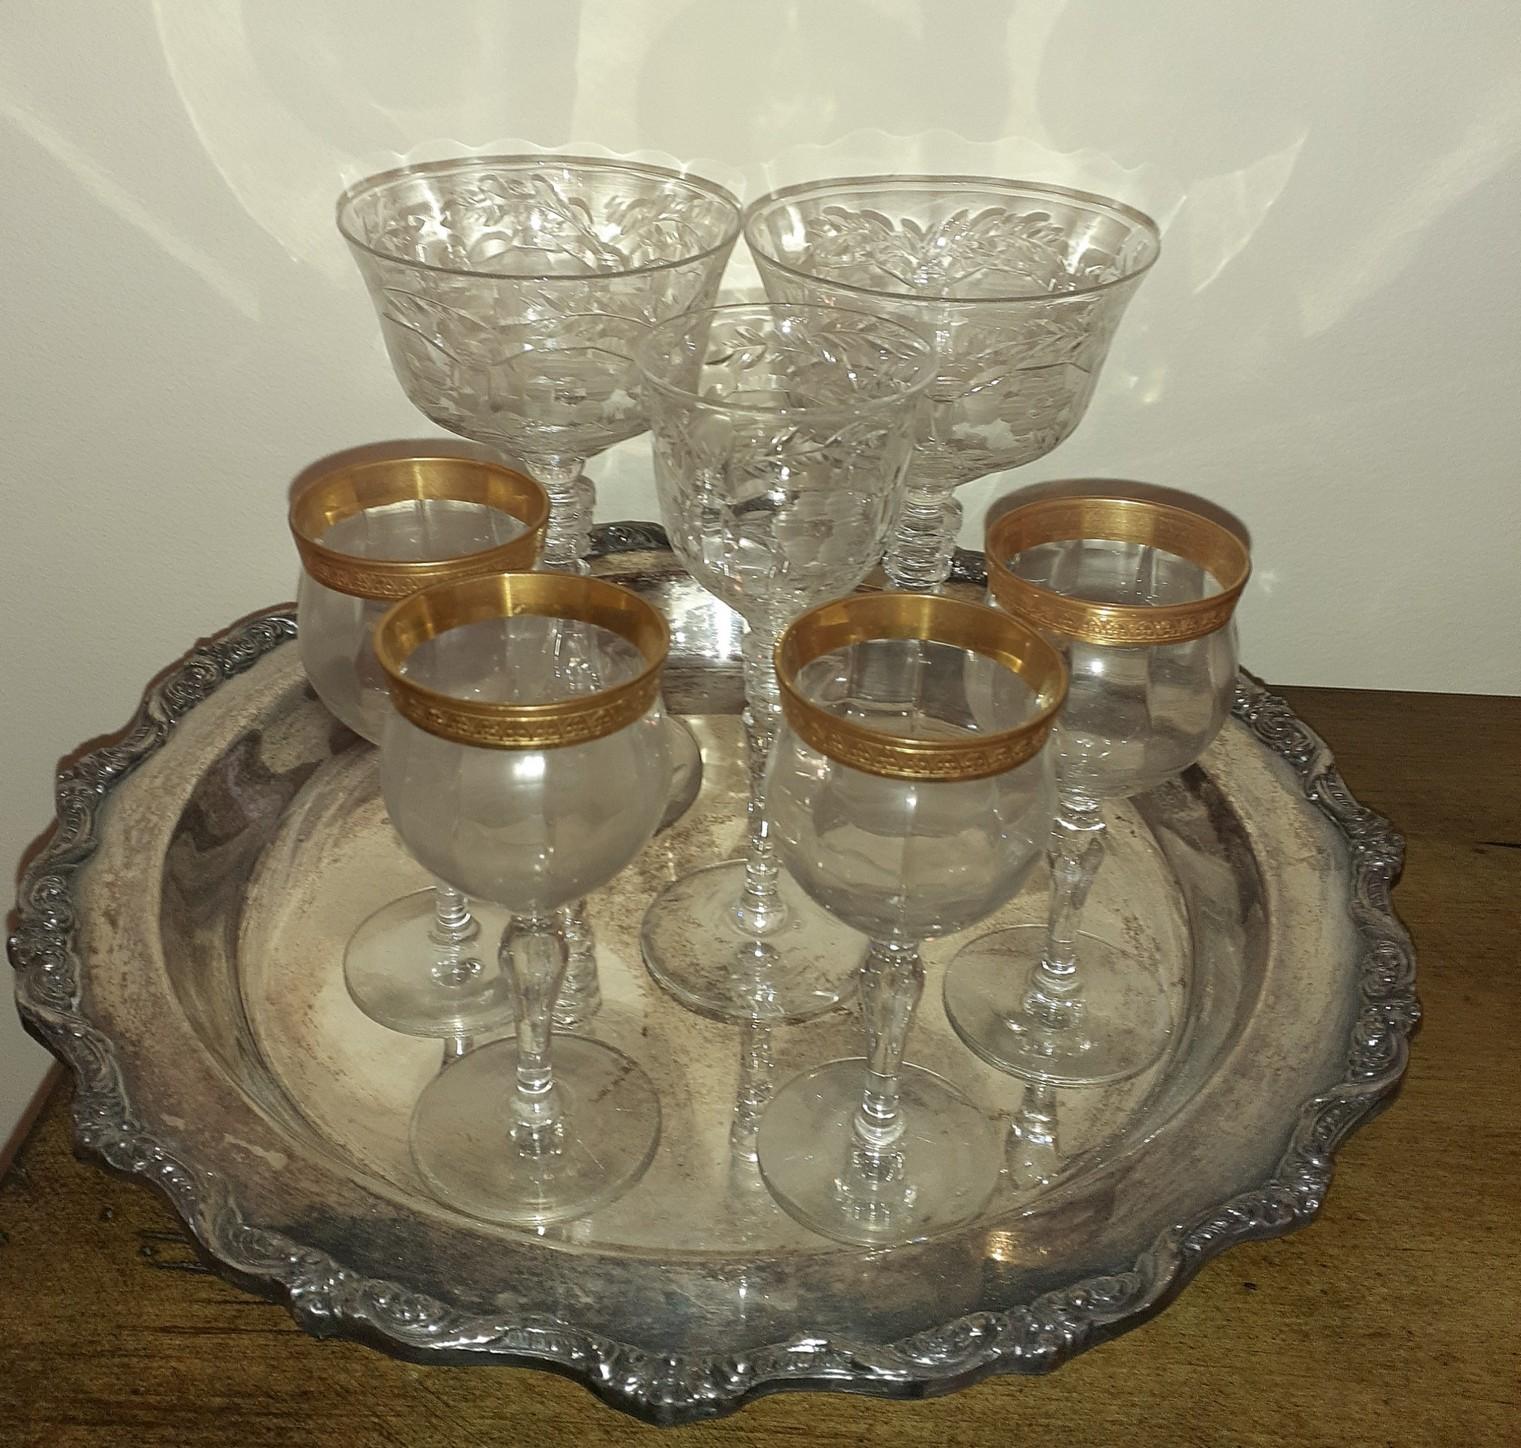 Crystal glasses and silverplate serving tray